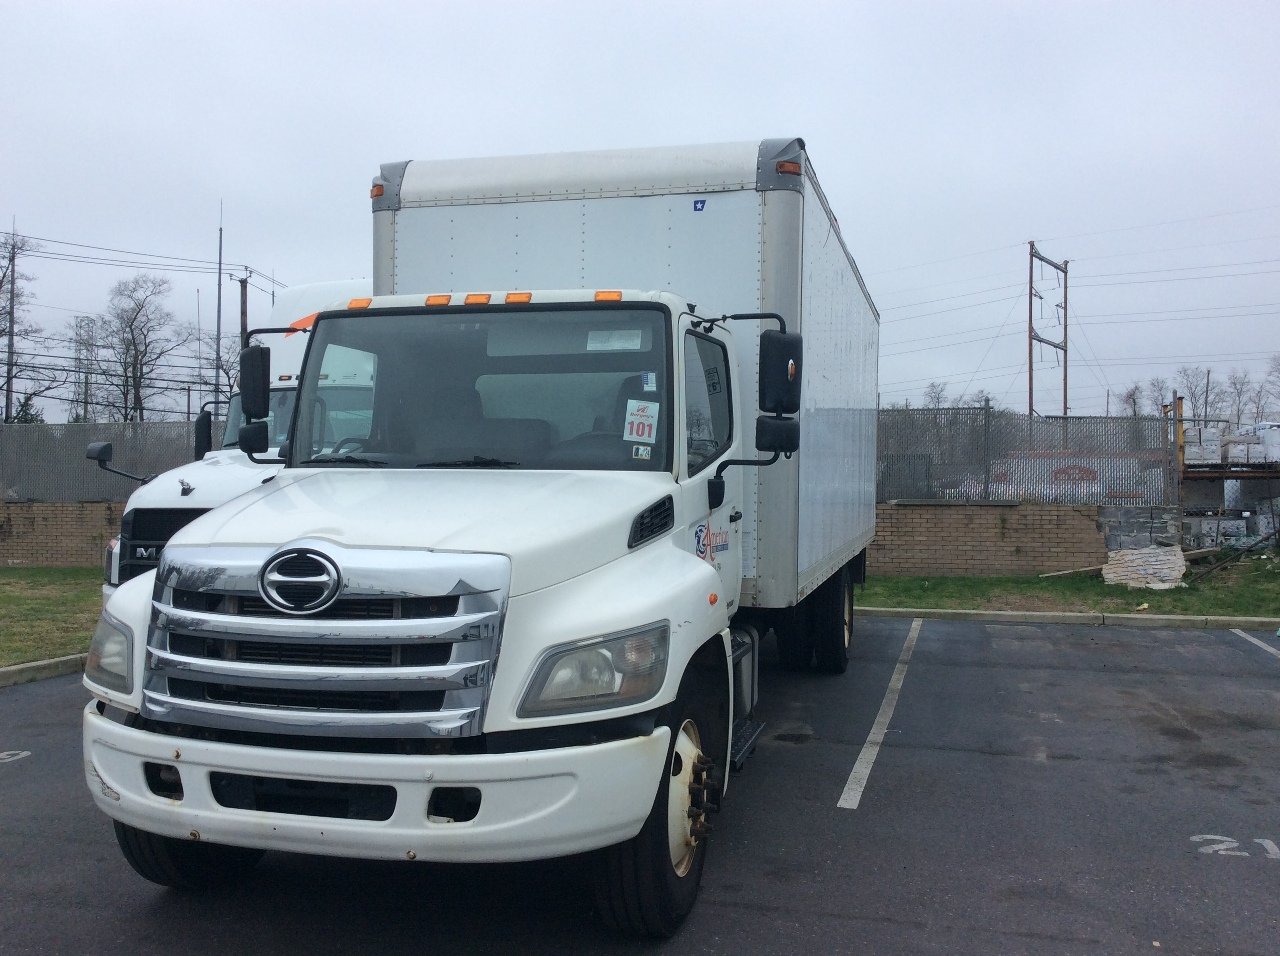 Used Truck Inventory - 1001821 01 2 - 46